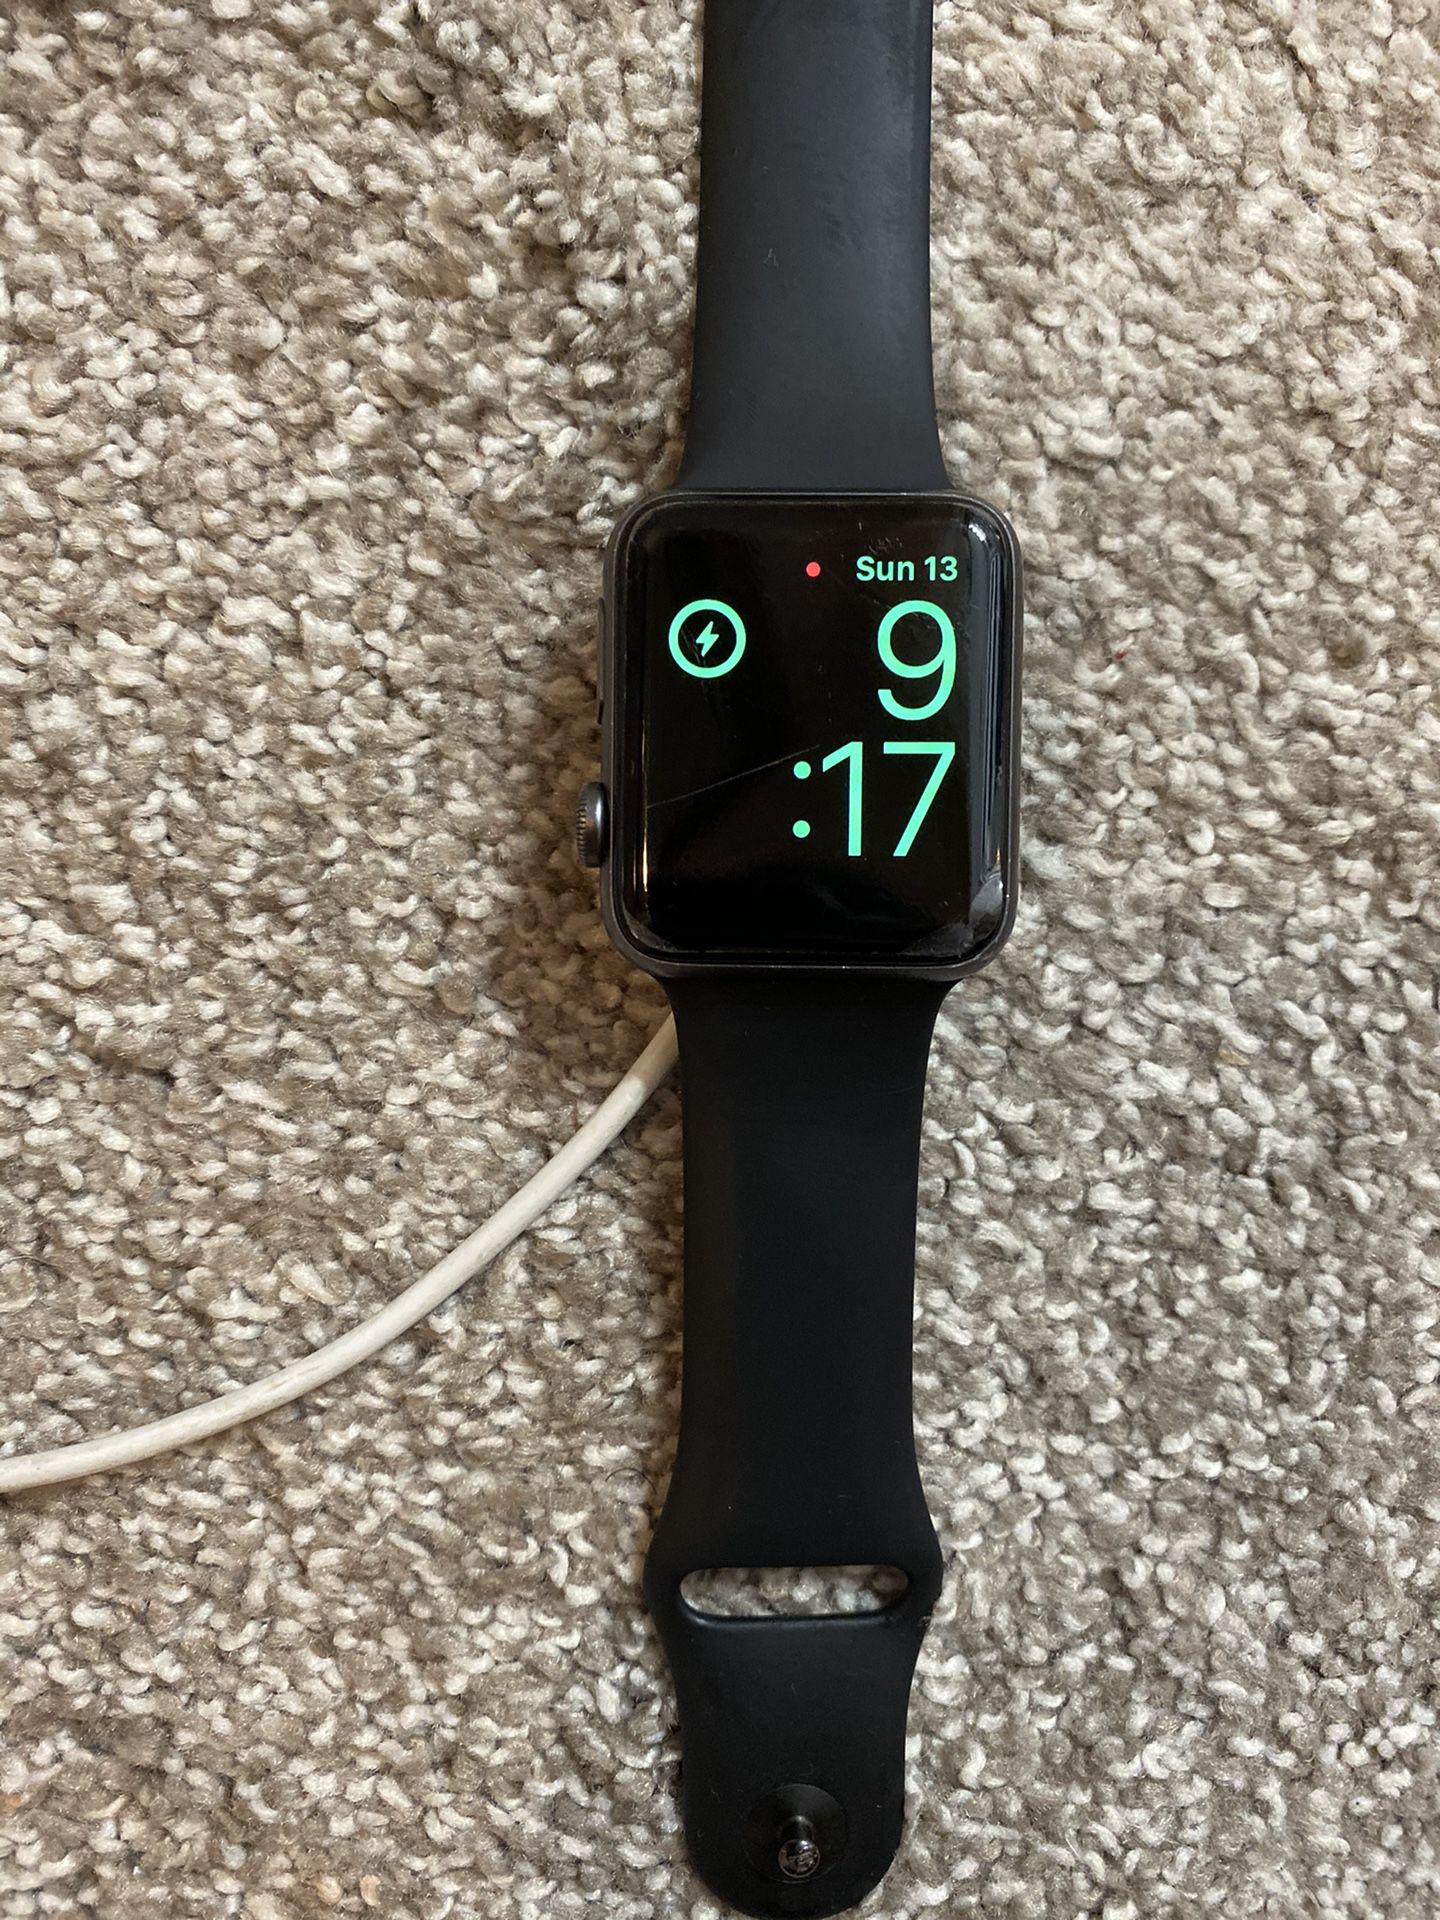 Series 3 Apple Watch with Cellular, screen protector, and extra band